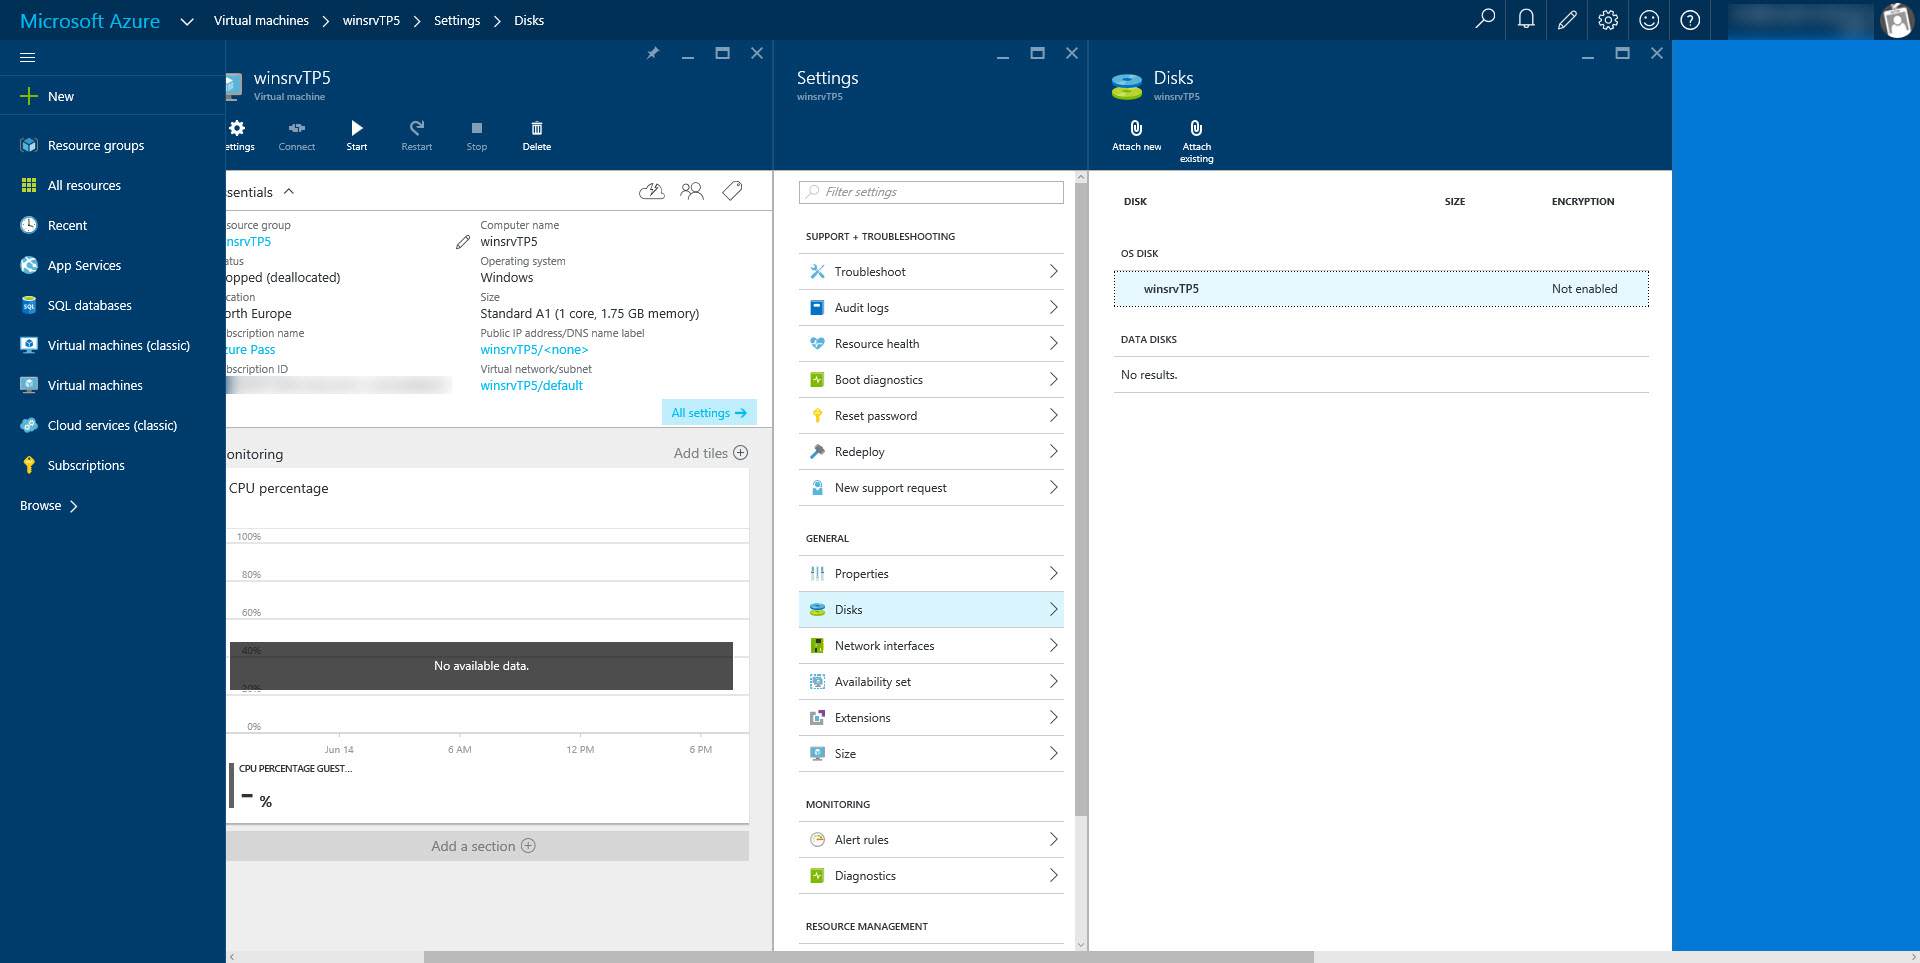 Adding a disk to a VM in Azure (Image Credit: Russell Smith)